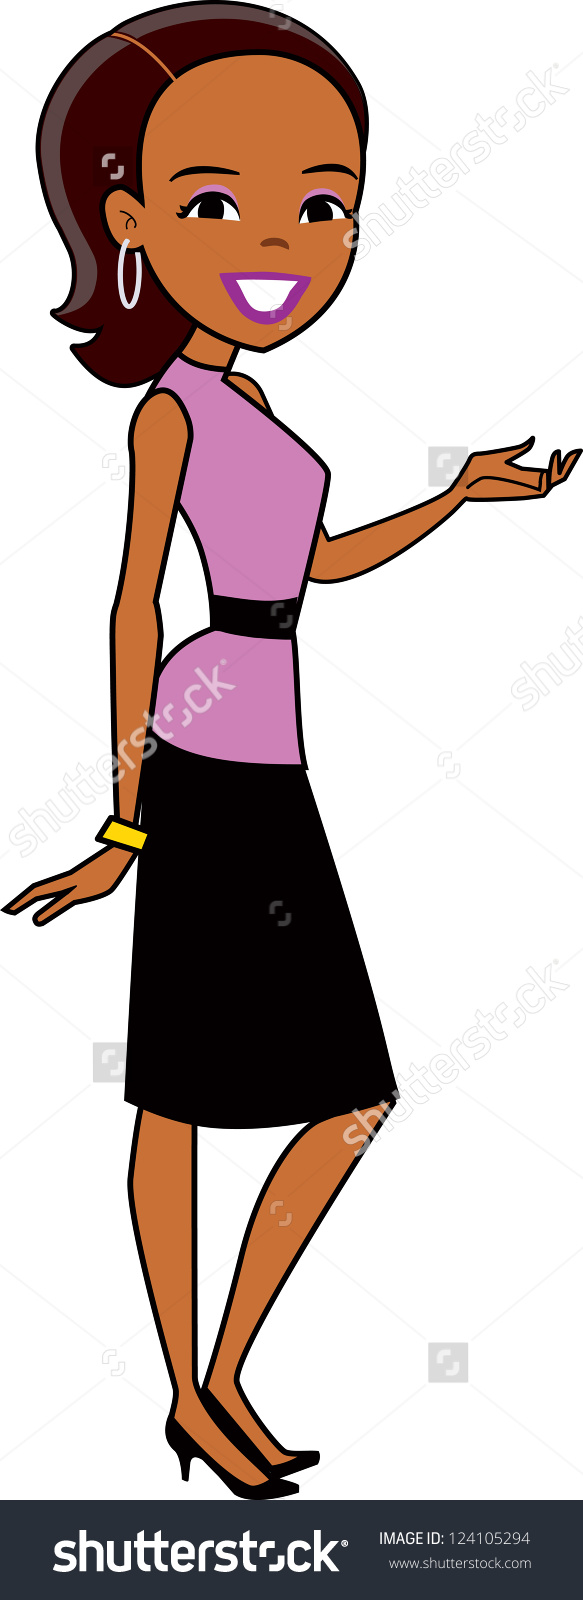 Cartoon Woman clip-art in retro style drawing presenting